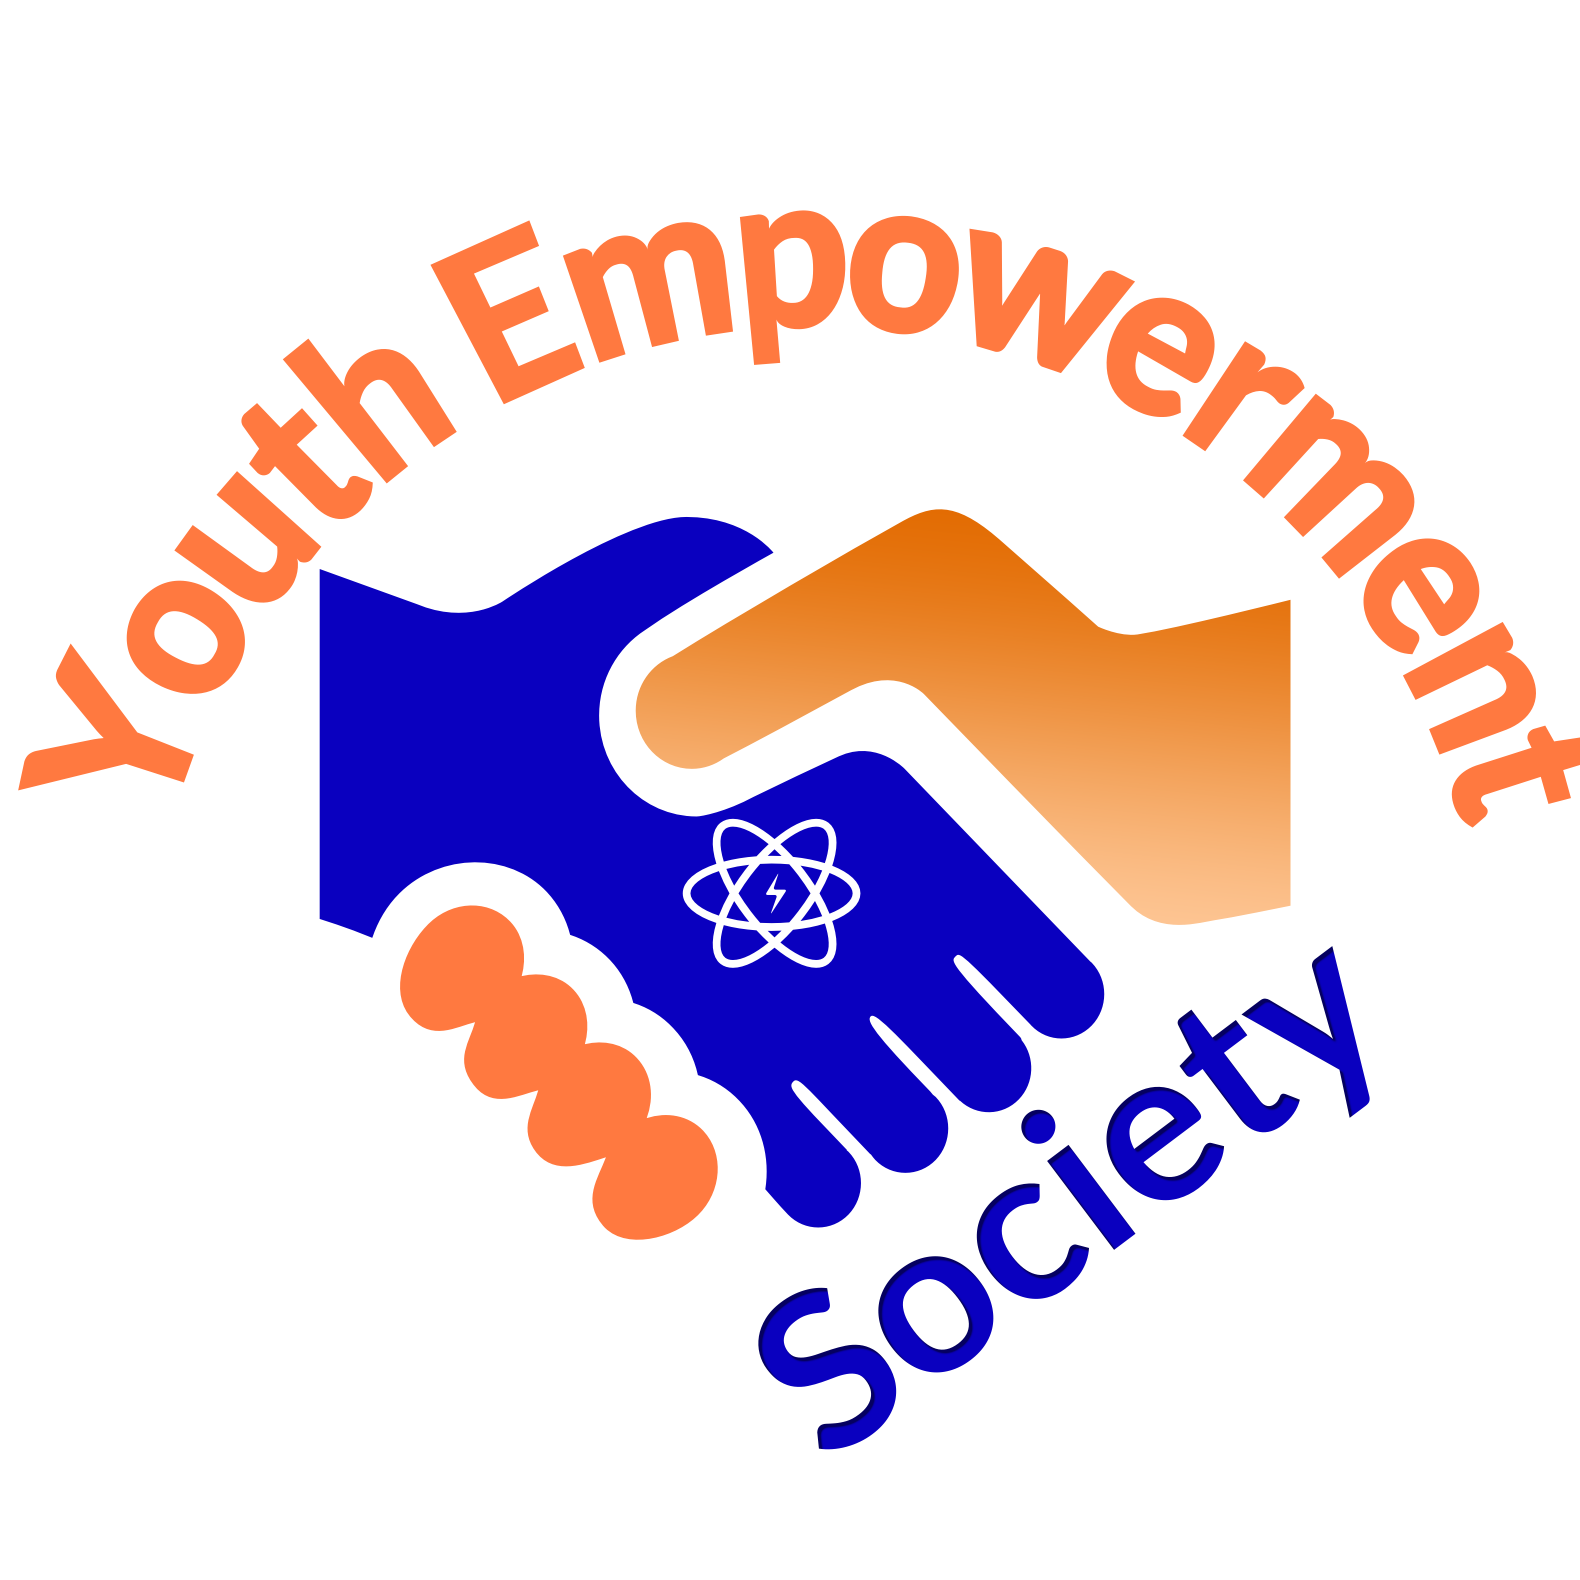 The Youth Empowerment Society